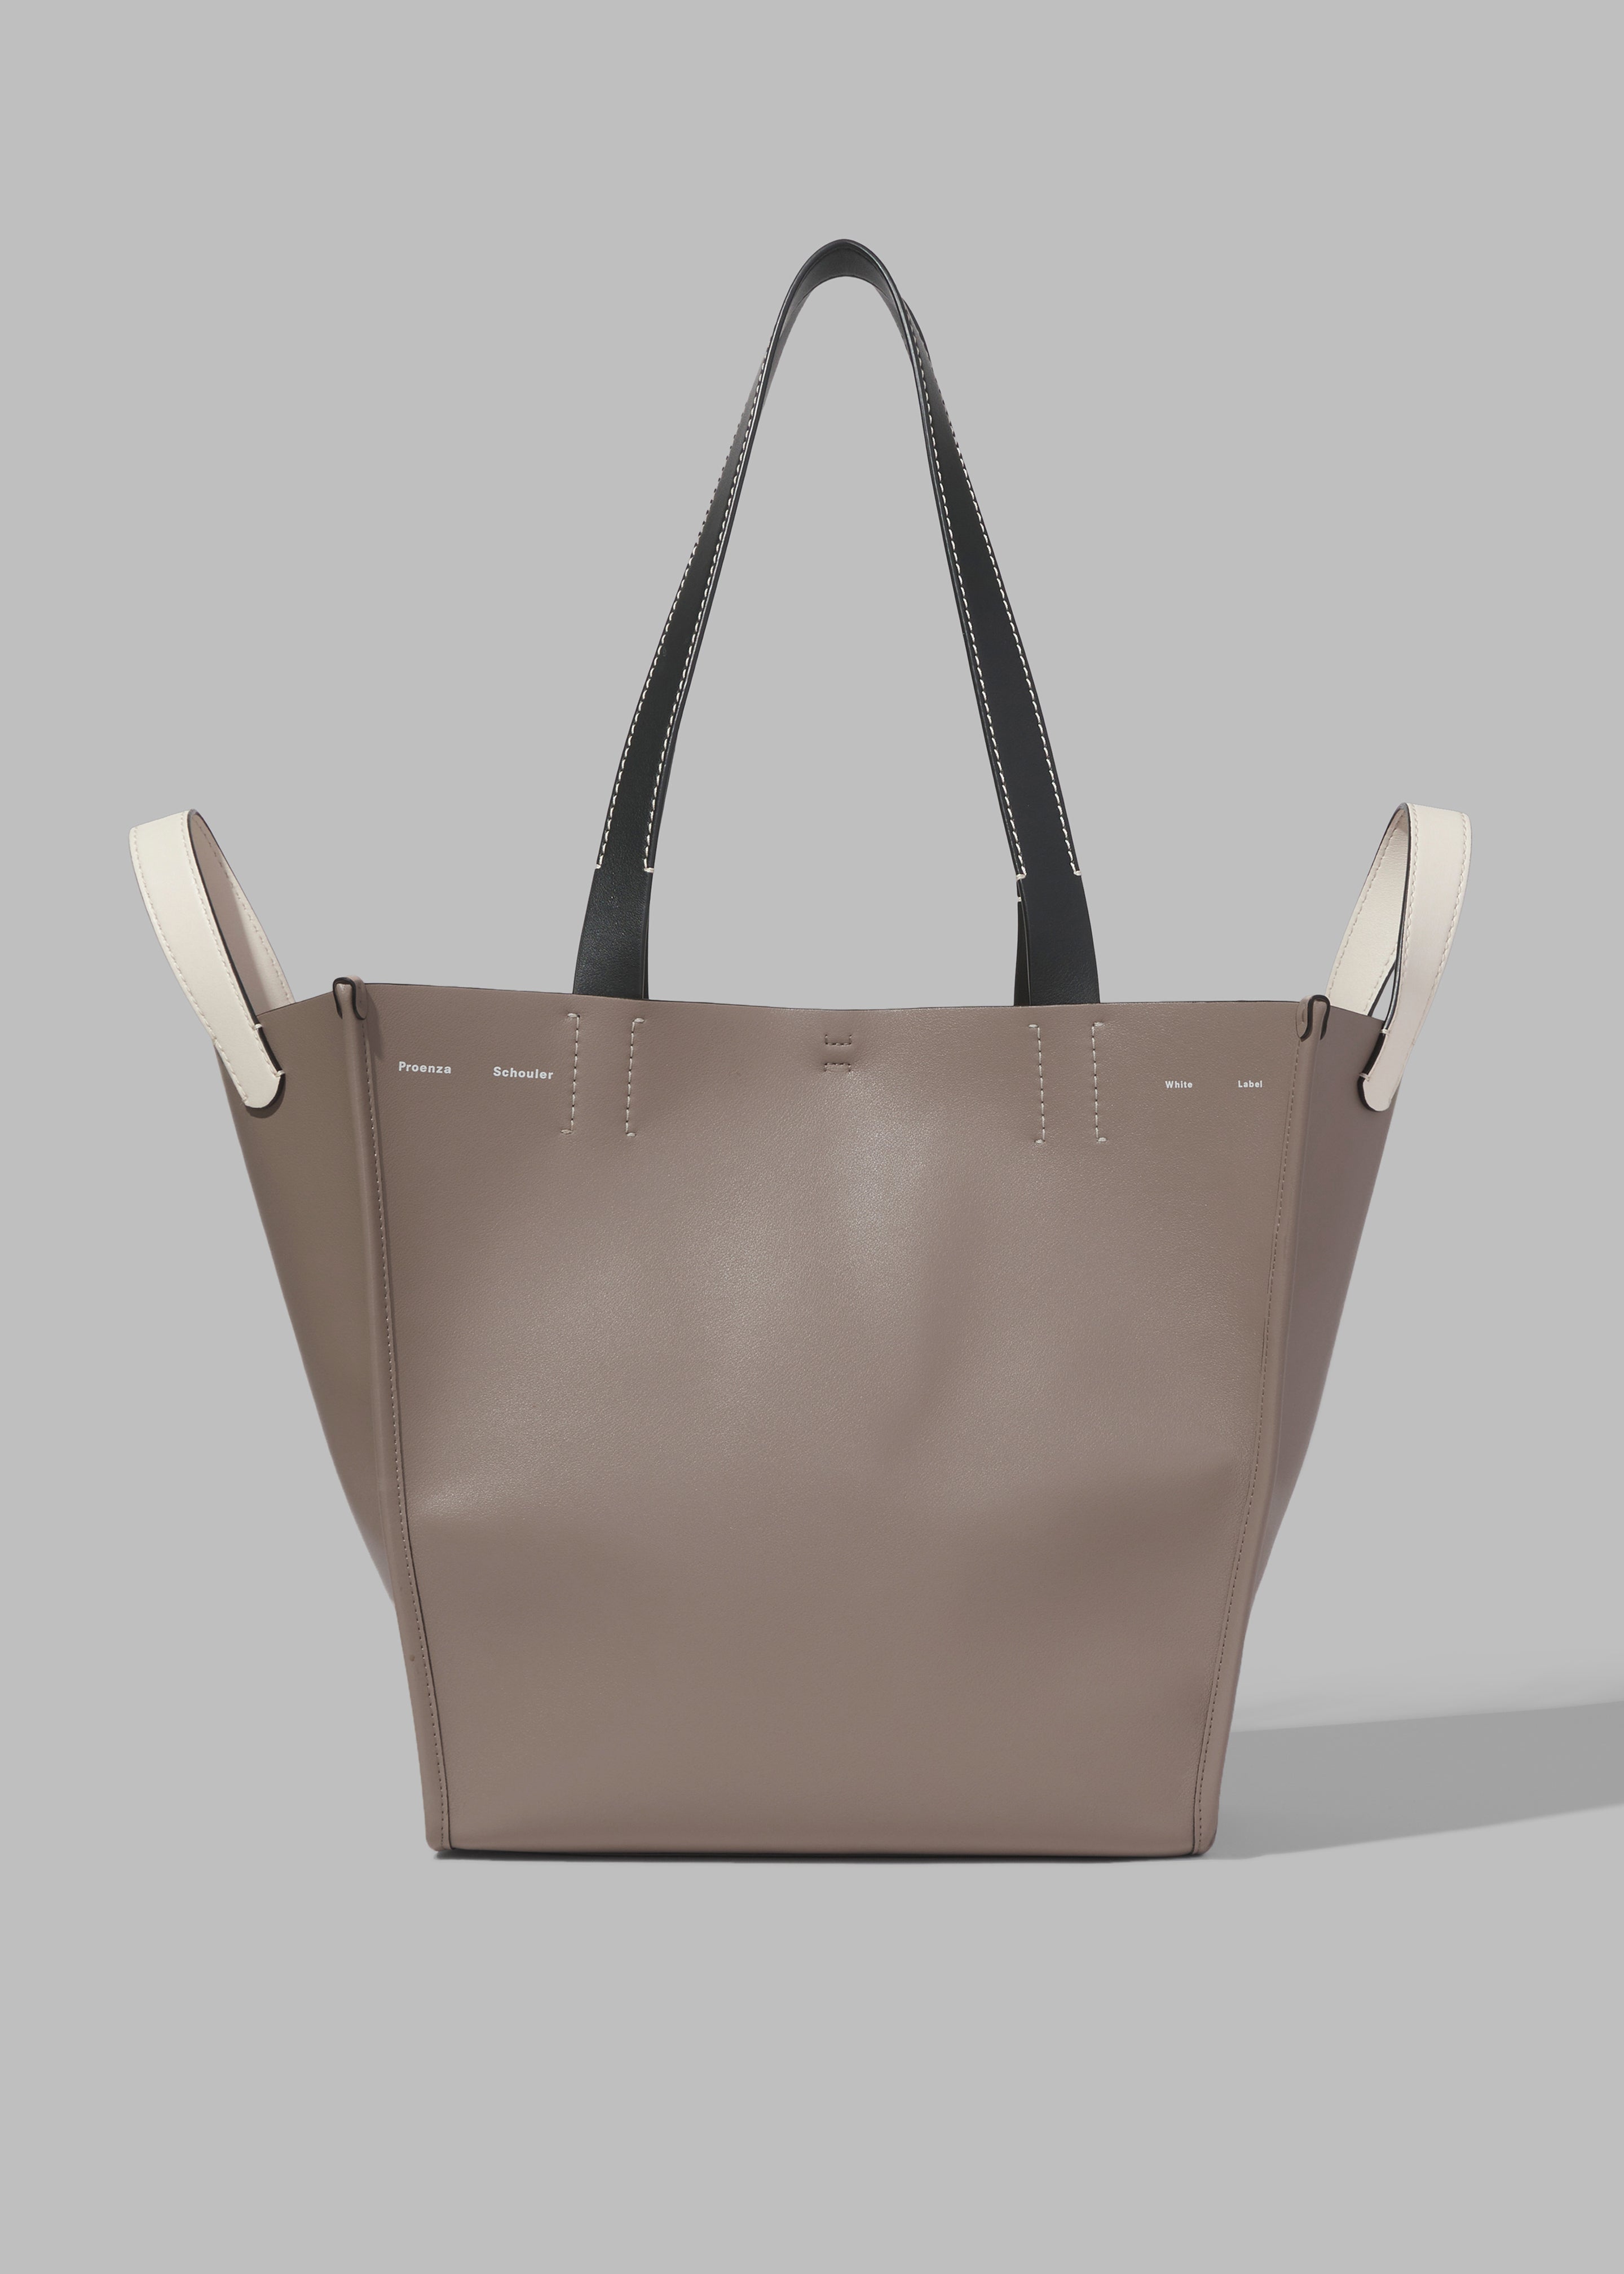 Proenza Schouler White Label Leather XL Mercer Tote - Clay - 1